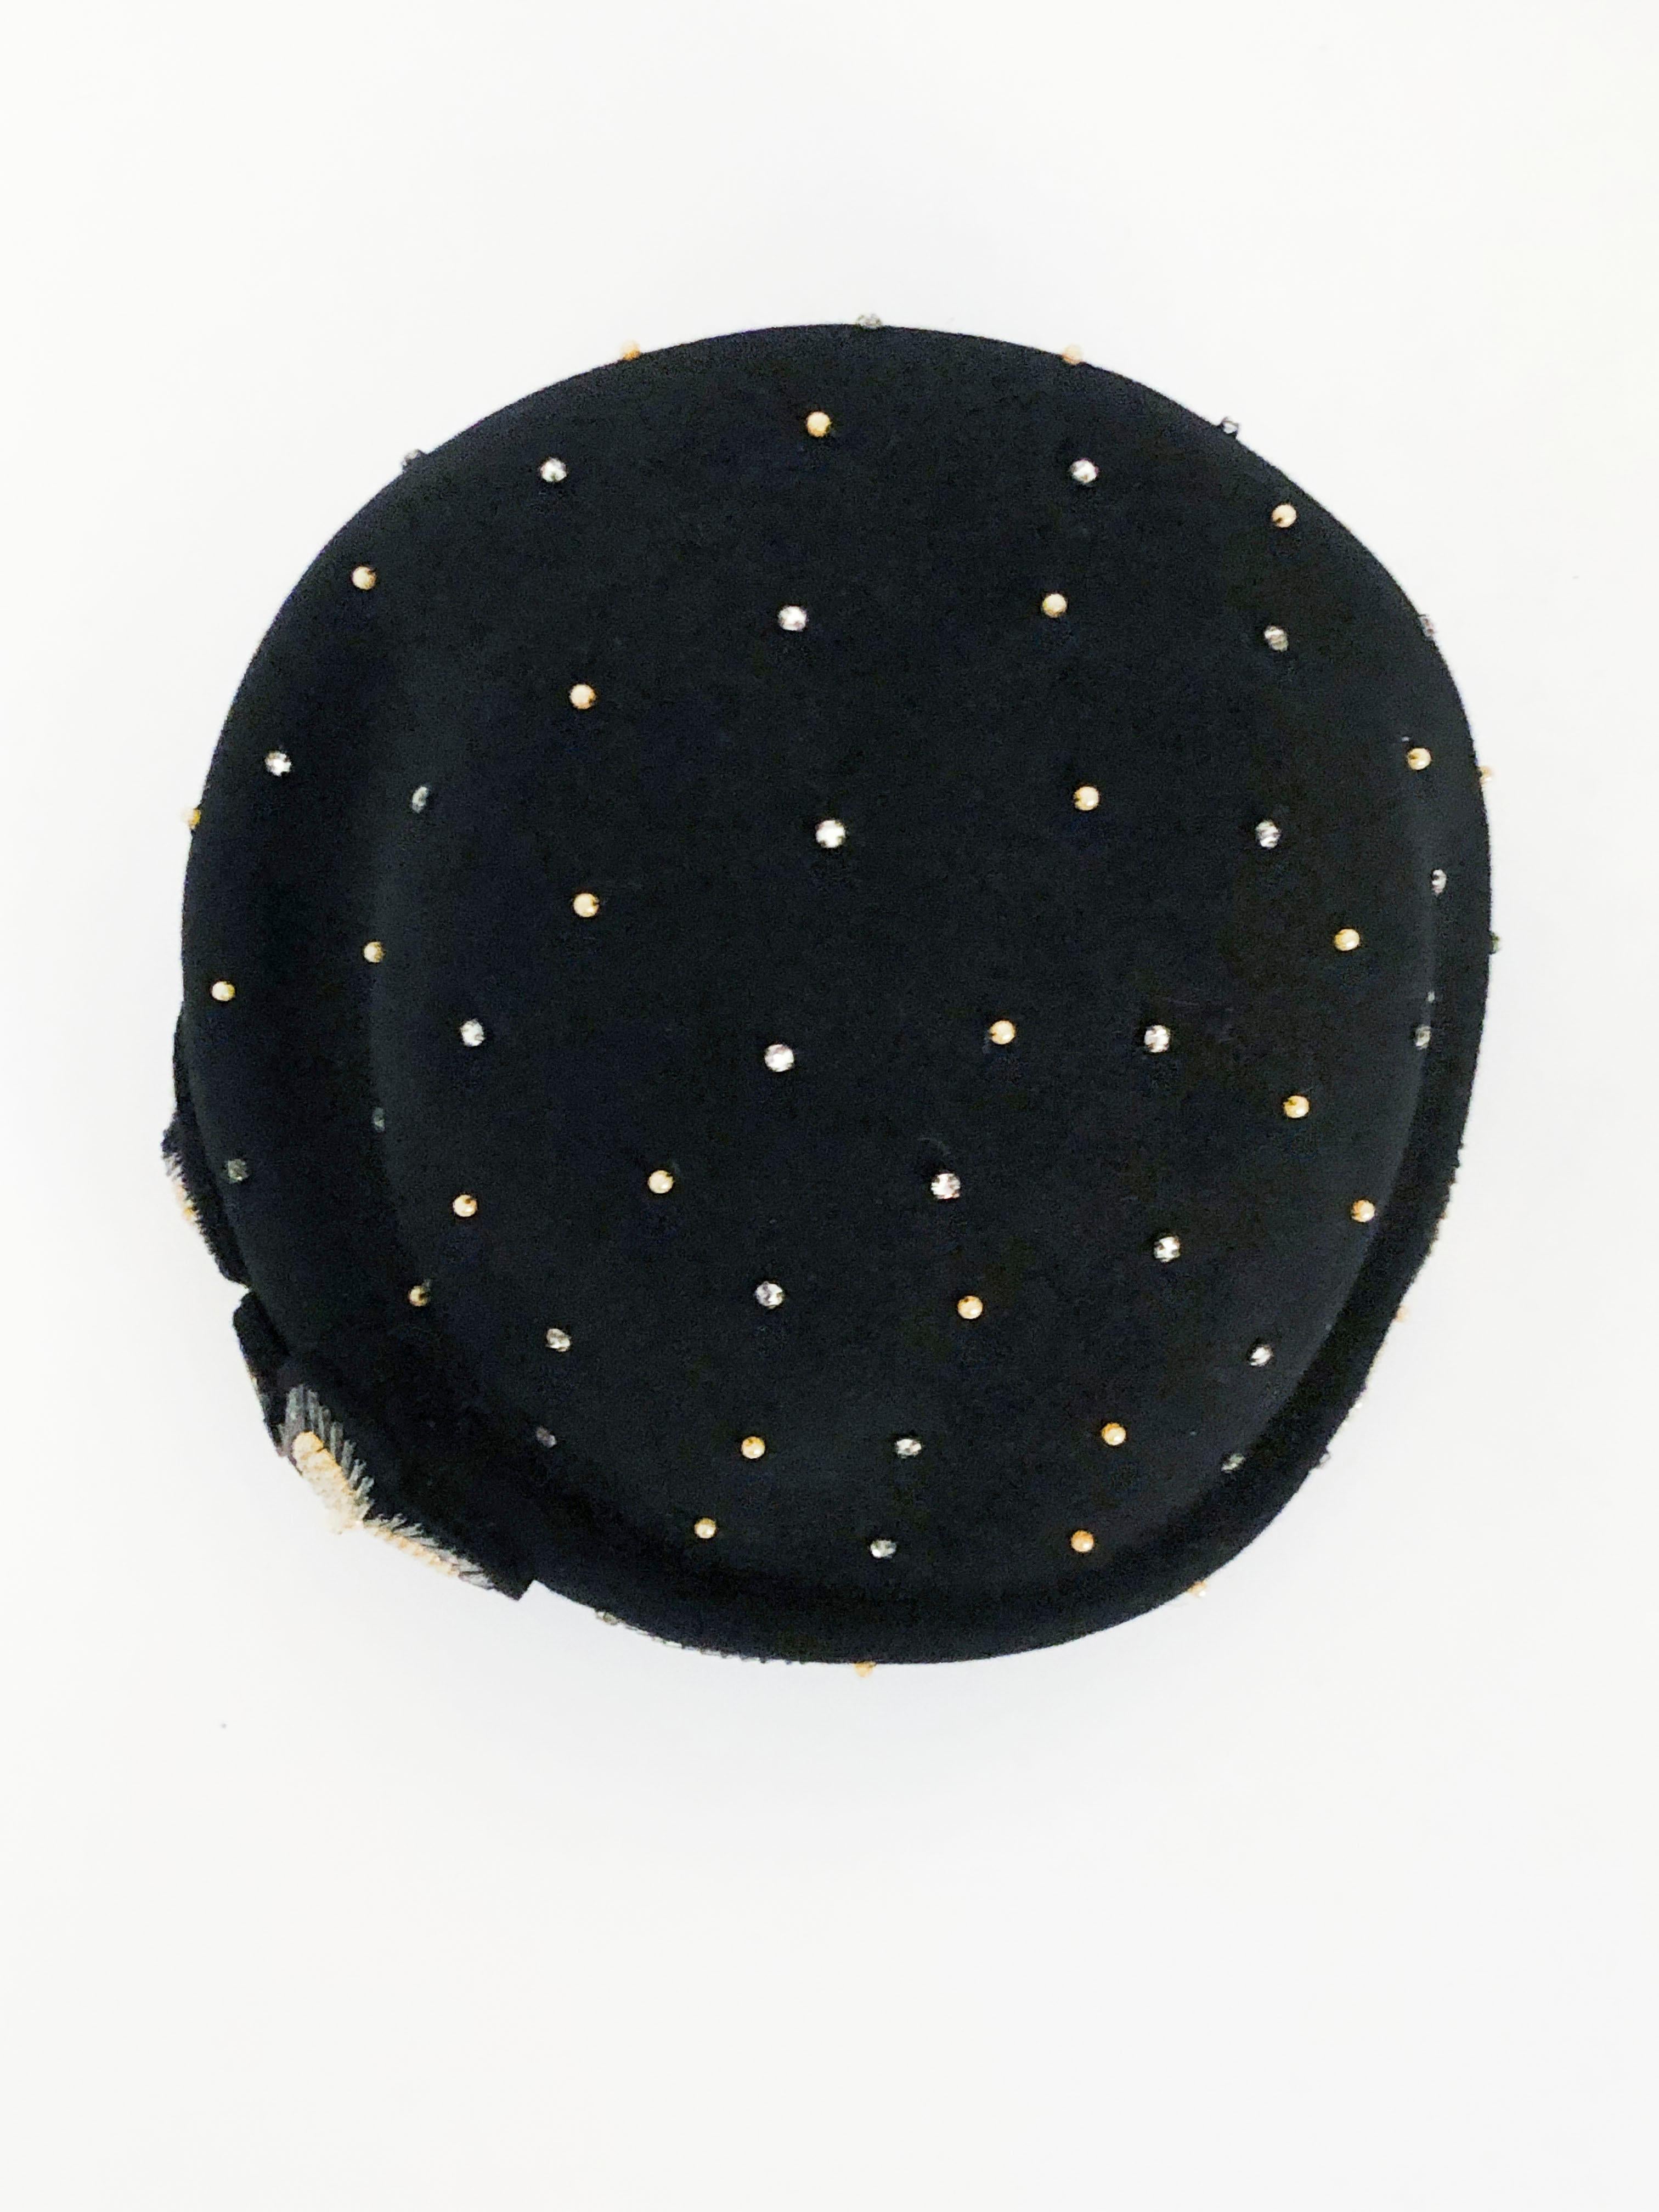 1950s Joseph Magnin Black Cashmere Hat with Beading and Stone Accents 1